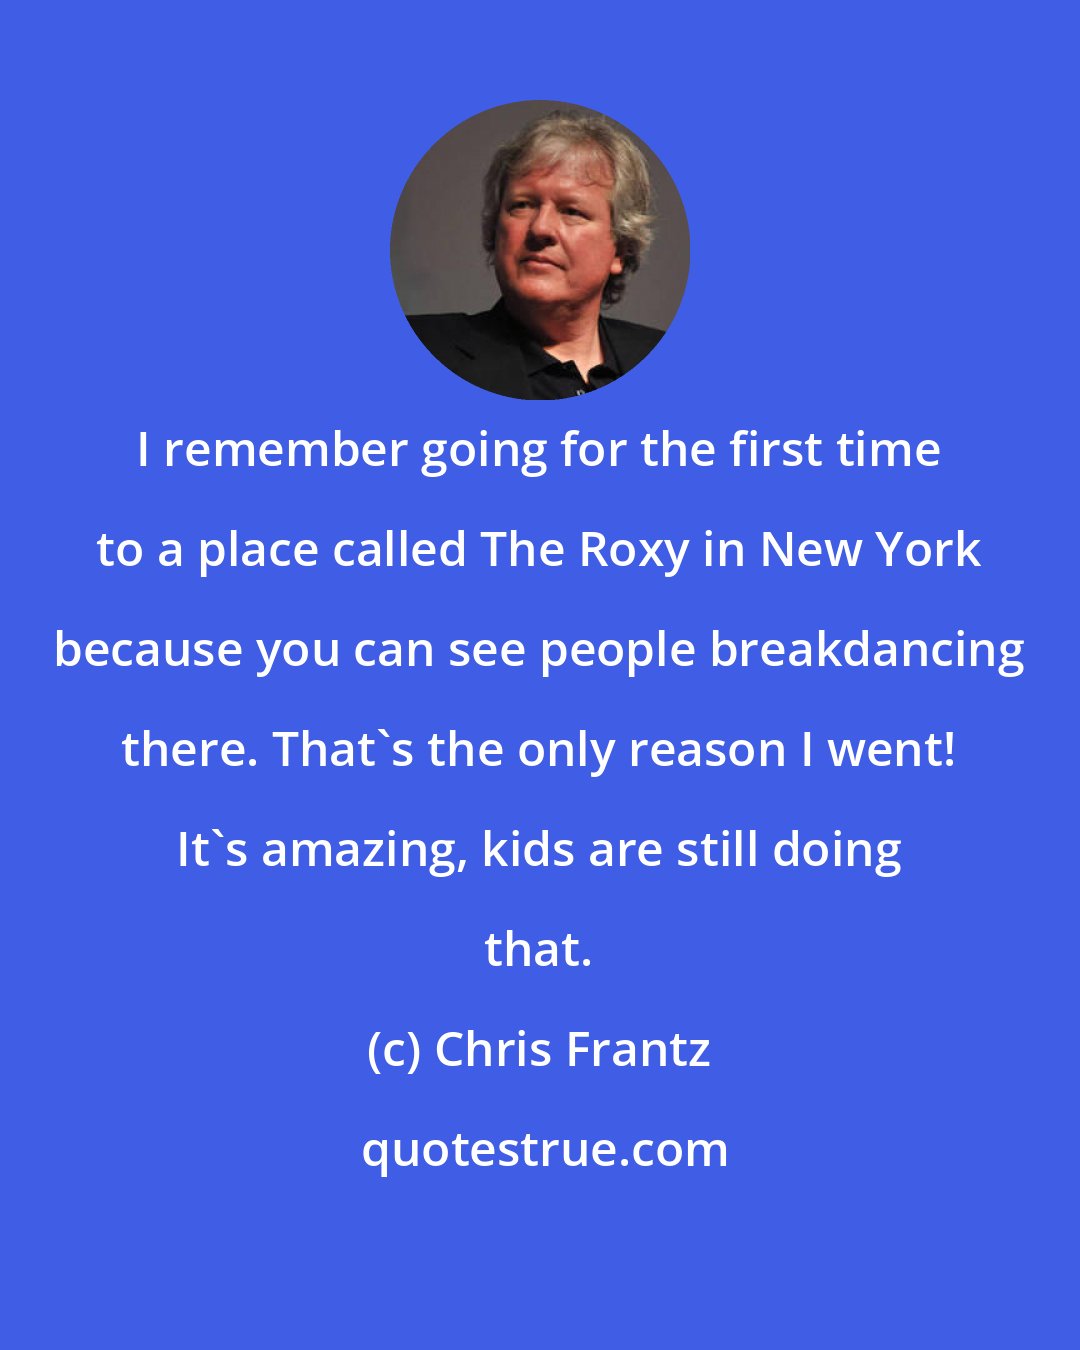 Chris Frantz: I remember going for the first time to a place called The Roxy in New York because you can see people breakdancing there. That's the only reason I went! It's amazing, kids are still doing that.